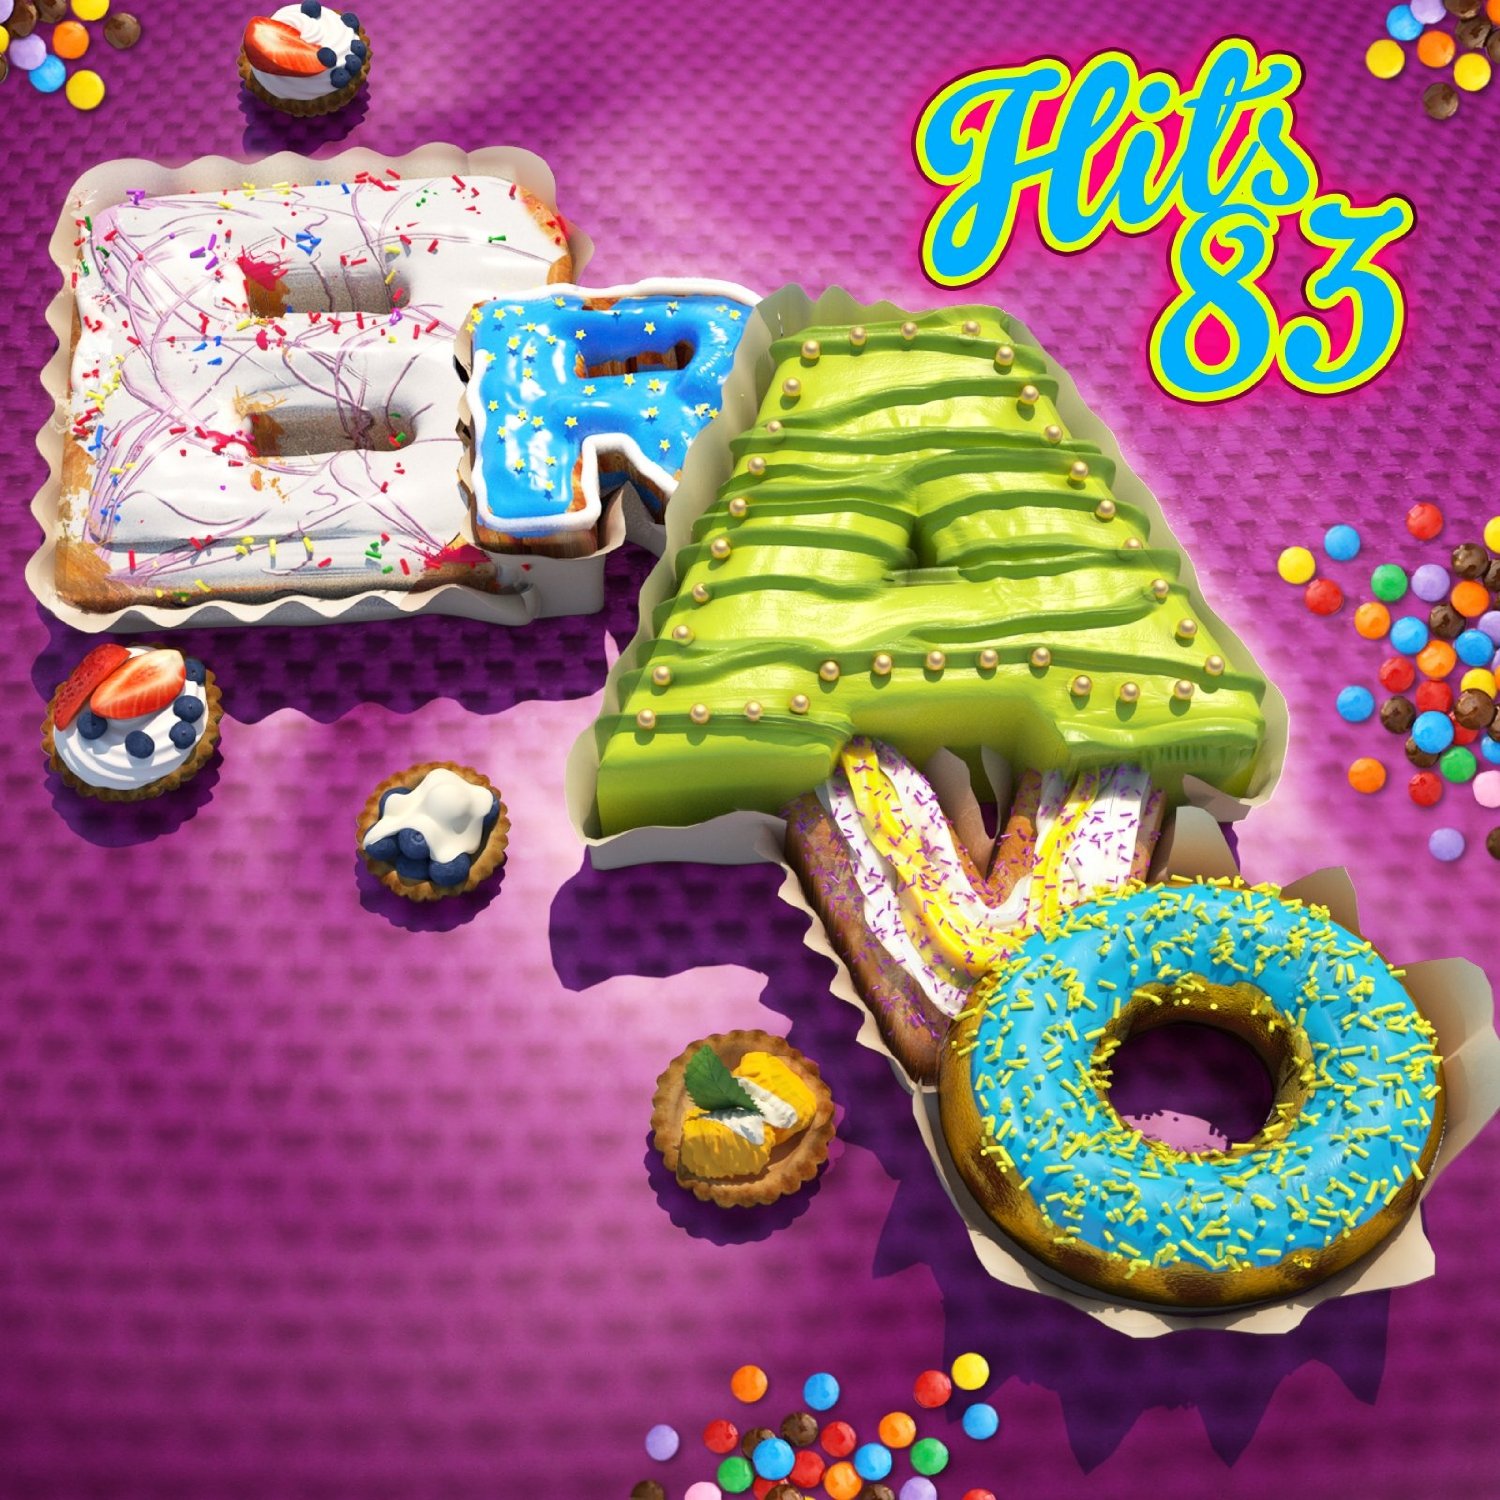 News Added Sep 22, 2013 BRAVO HITS 83 - this is the icing on the cupcake a joke! You have enough of artificially sounding unbedfriedigenden pop songs? Then here is the ultimate hit recipe! The new BRAVO HITS is finished with the best HIts and offers everything for a successful hit enjoyment! These companies include […]